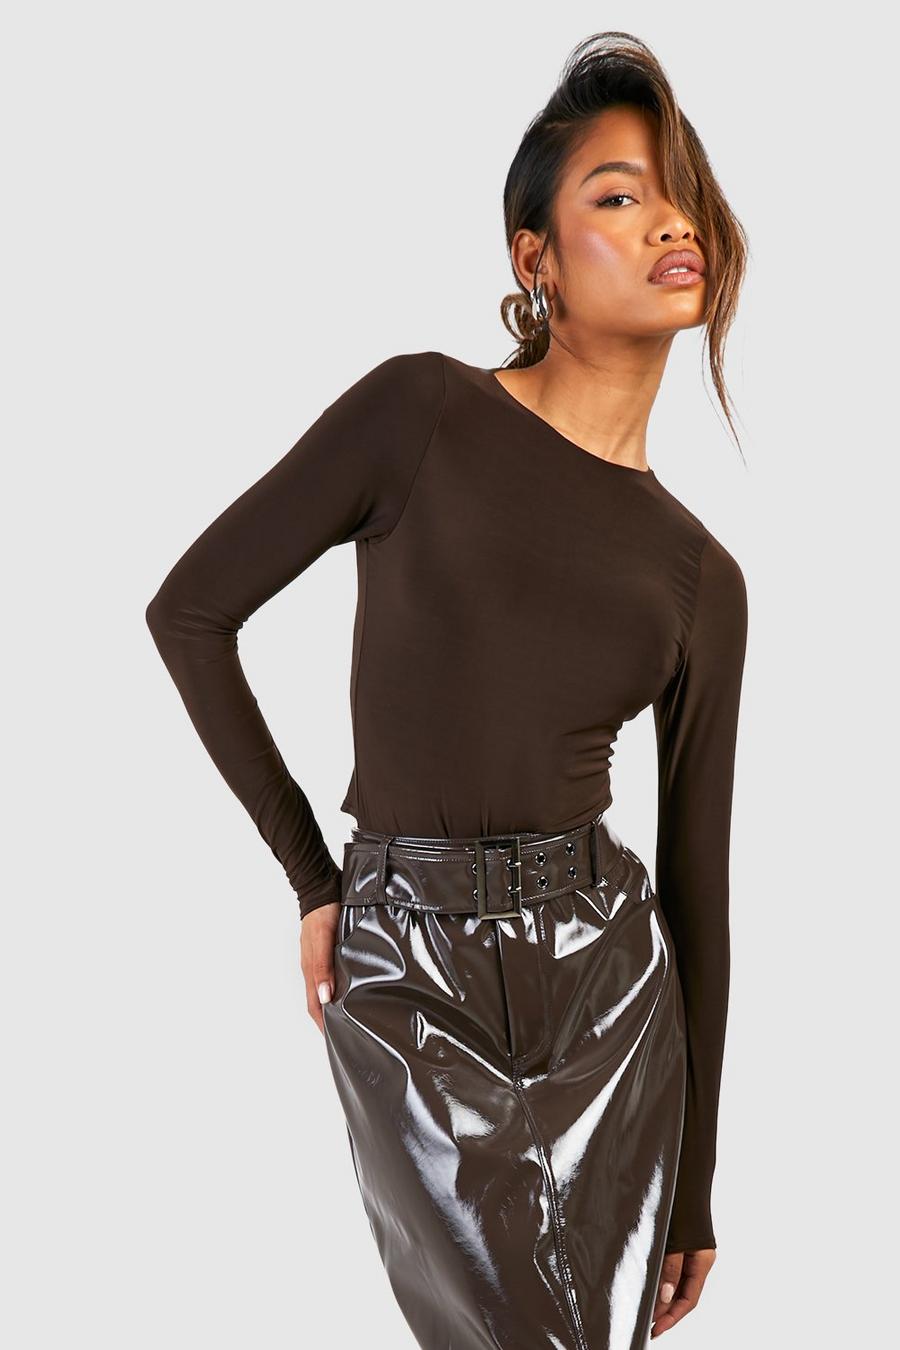 Women lose it over ridiculously high-cut 'front wedgie' bodysuit from  Boohoo.com